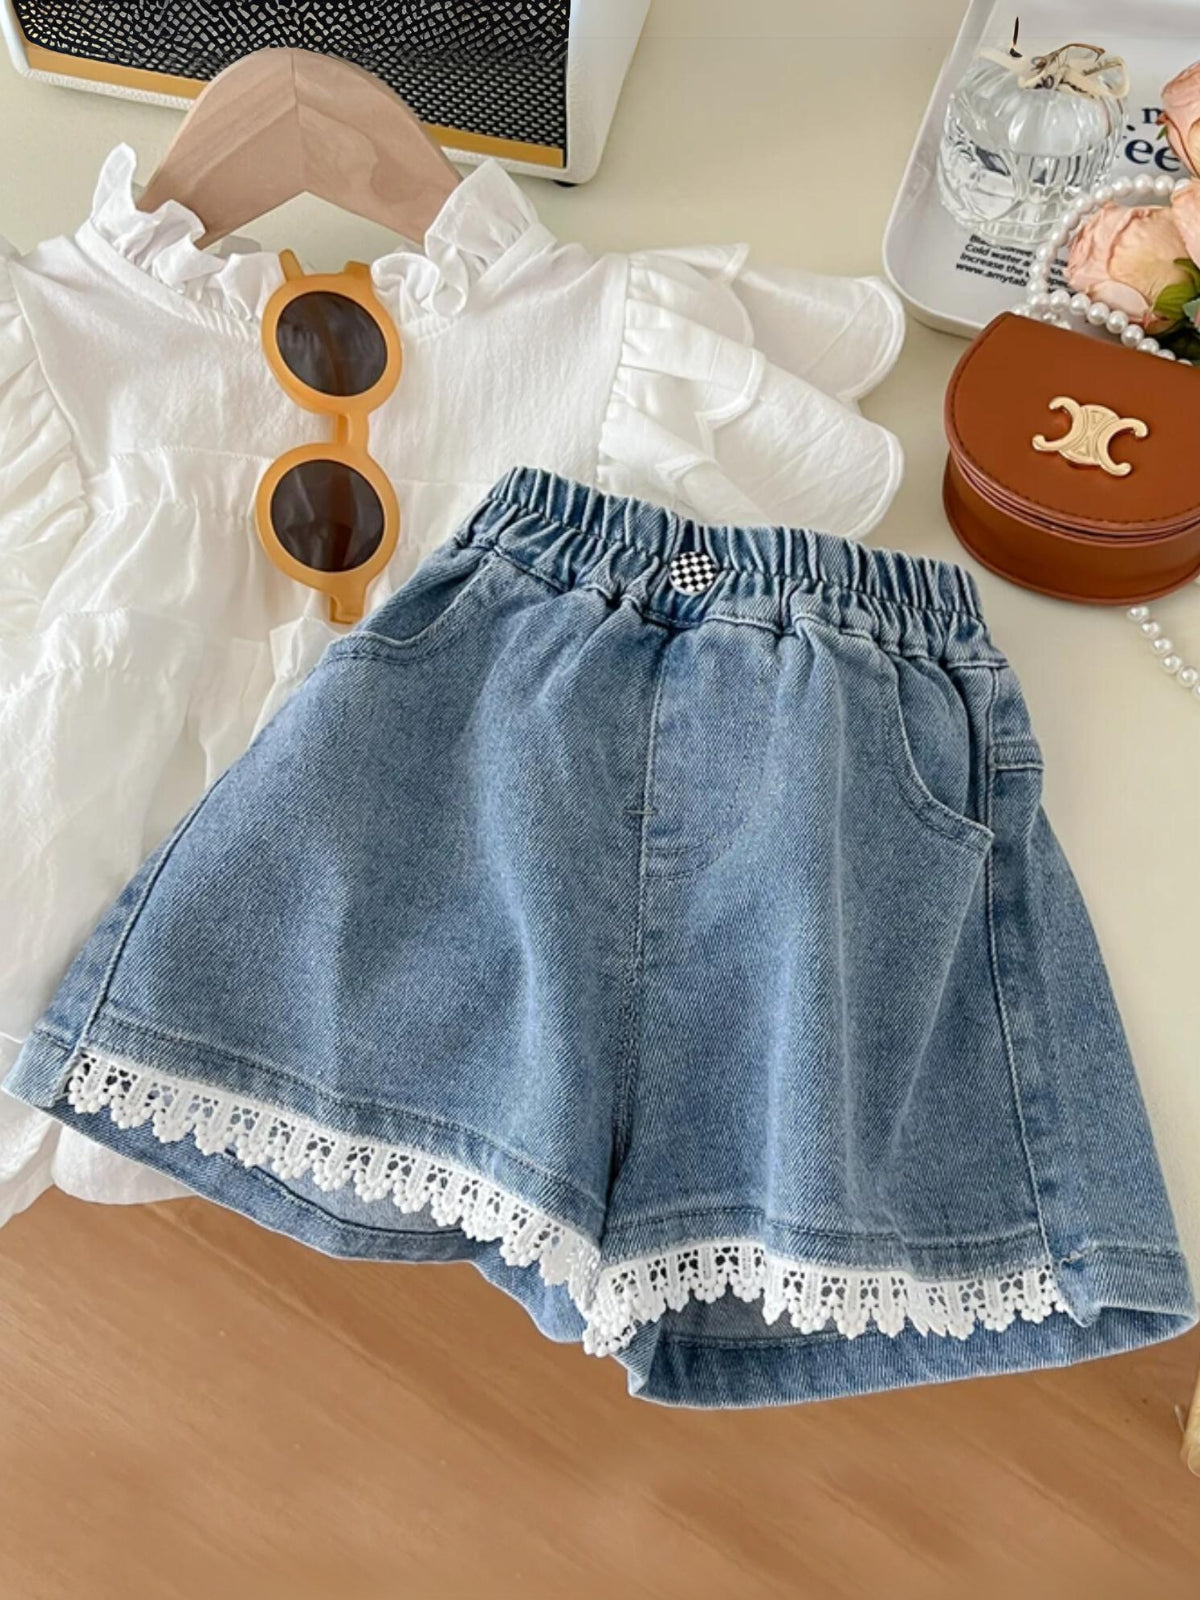 Mia Belle Girls White Top And Denim Short Set | Girls Spring Outfits